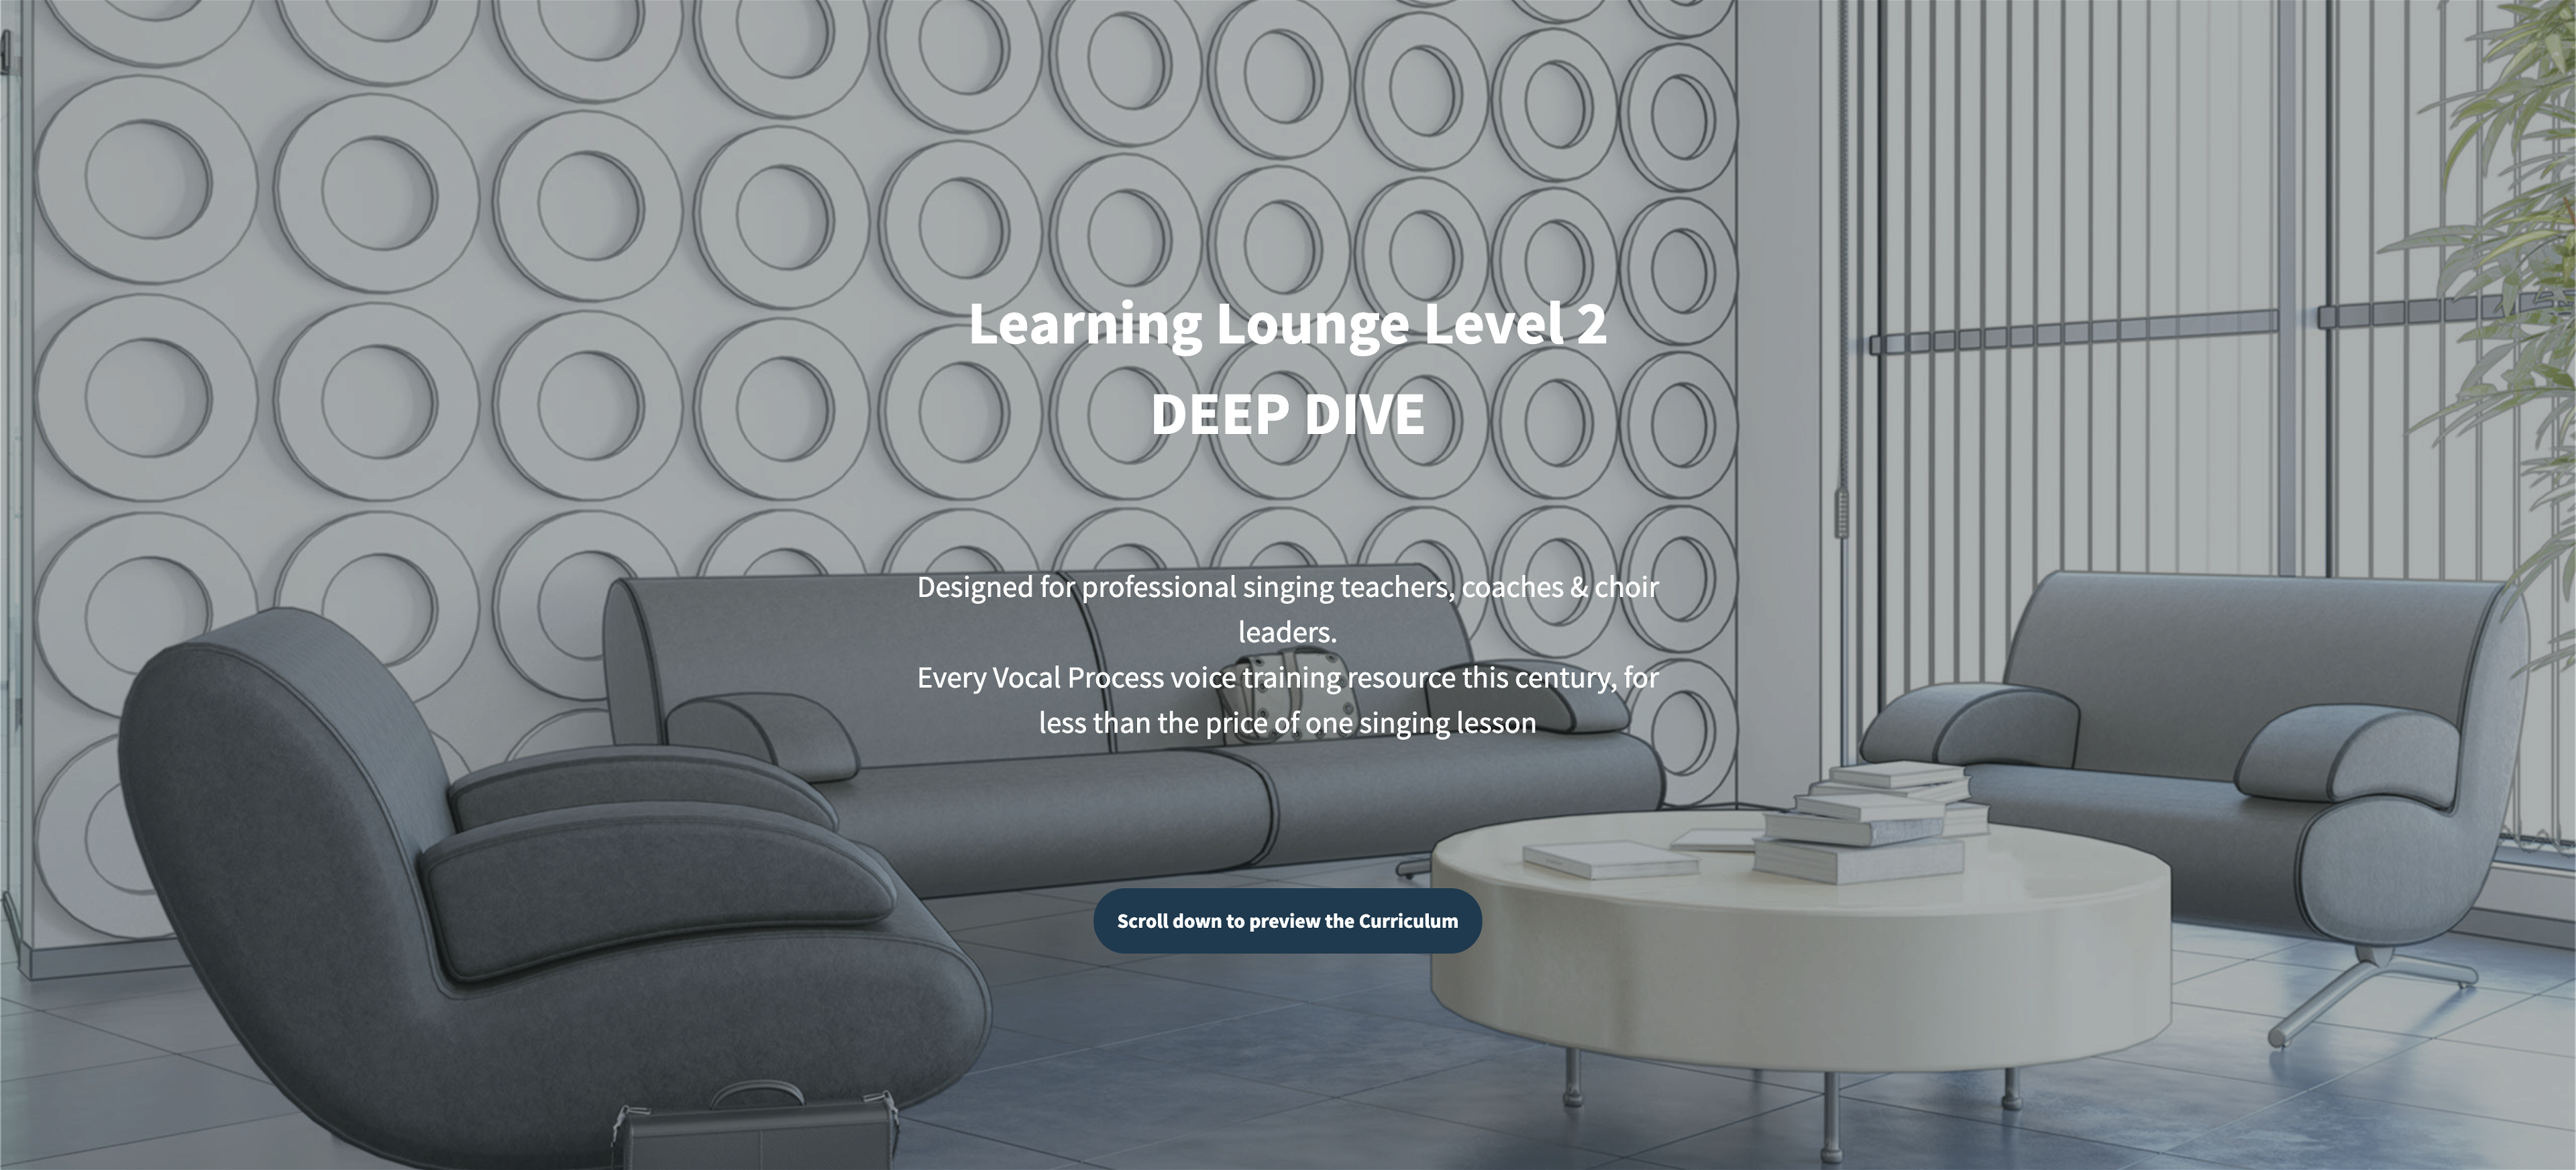 Learning Lounge Level 2 DEEP DIVE